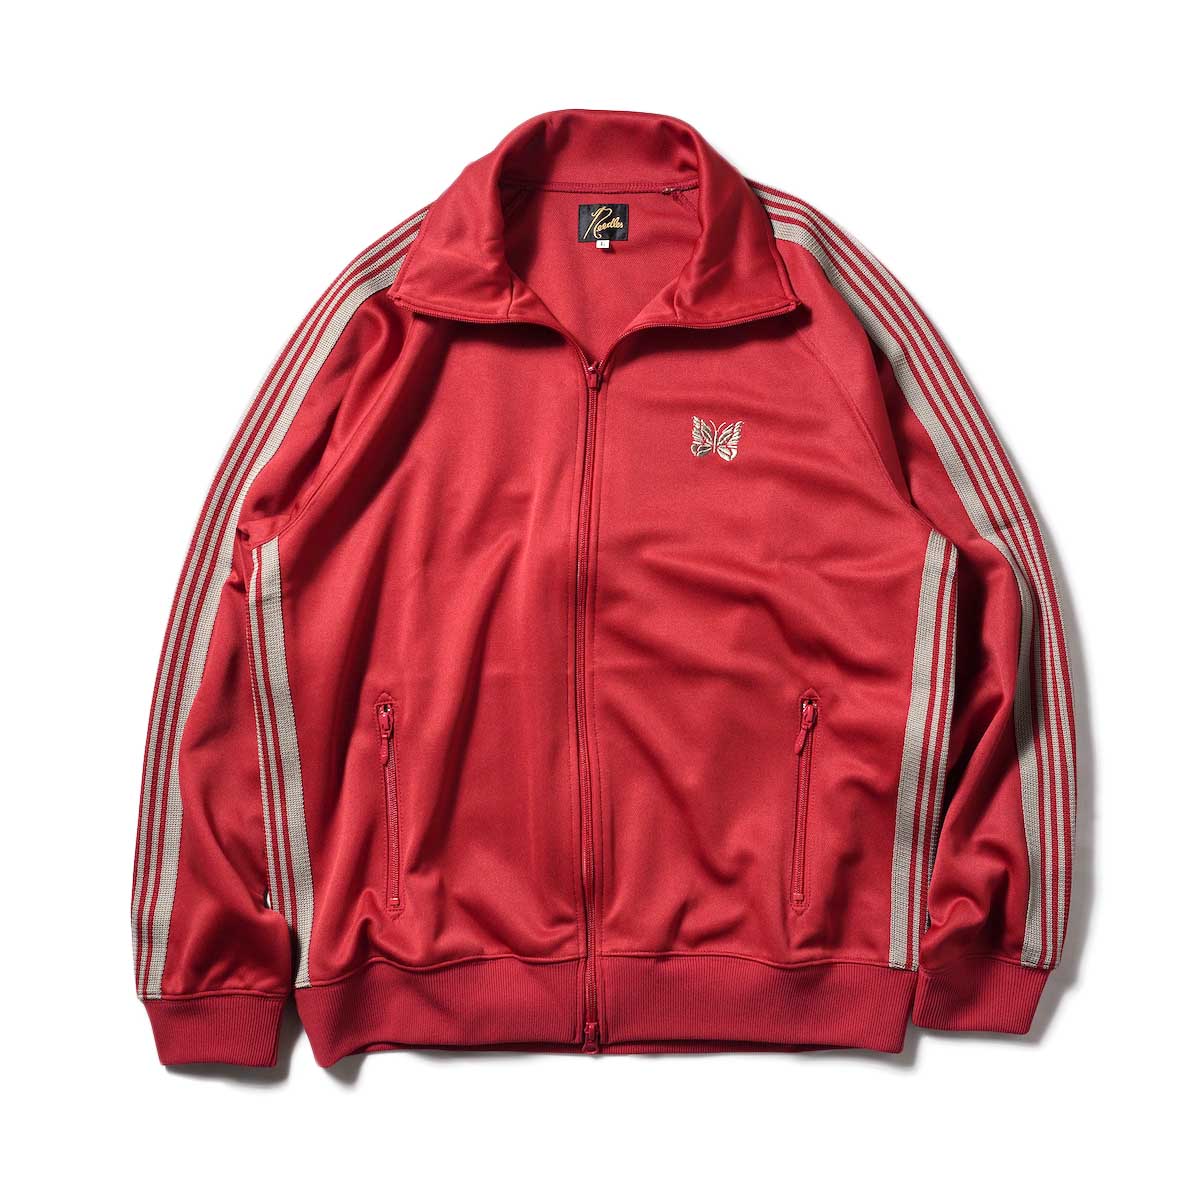 Needles / TRACK JACKET - POLY SMOOTH (Red)正面